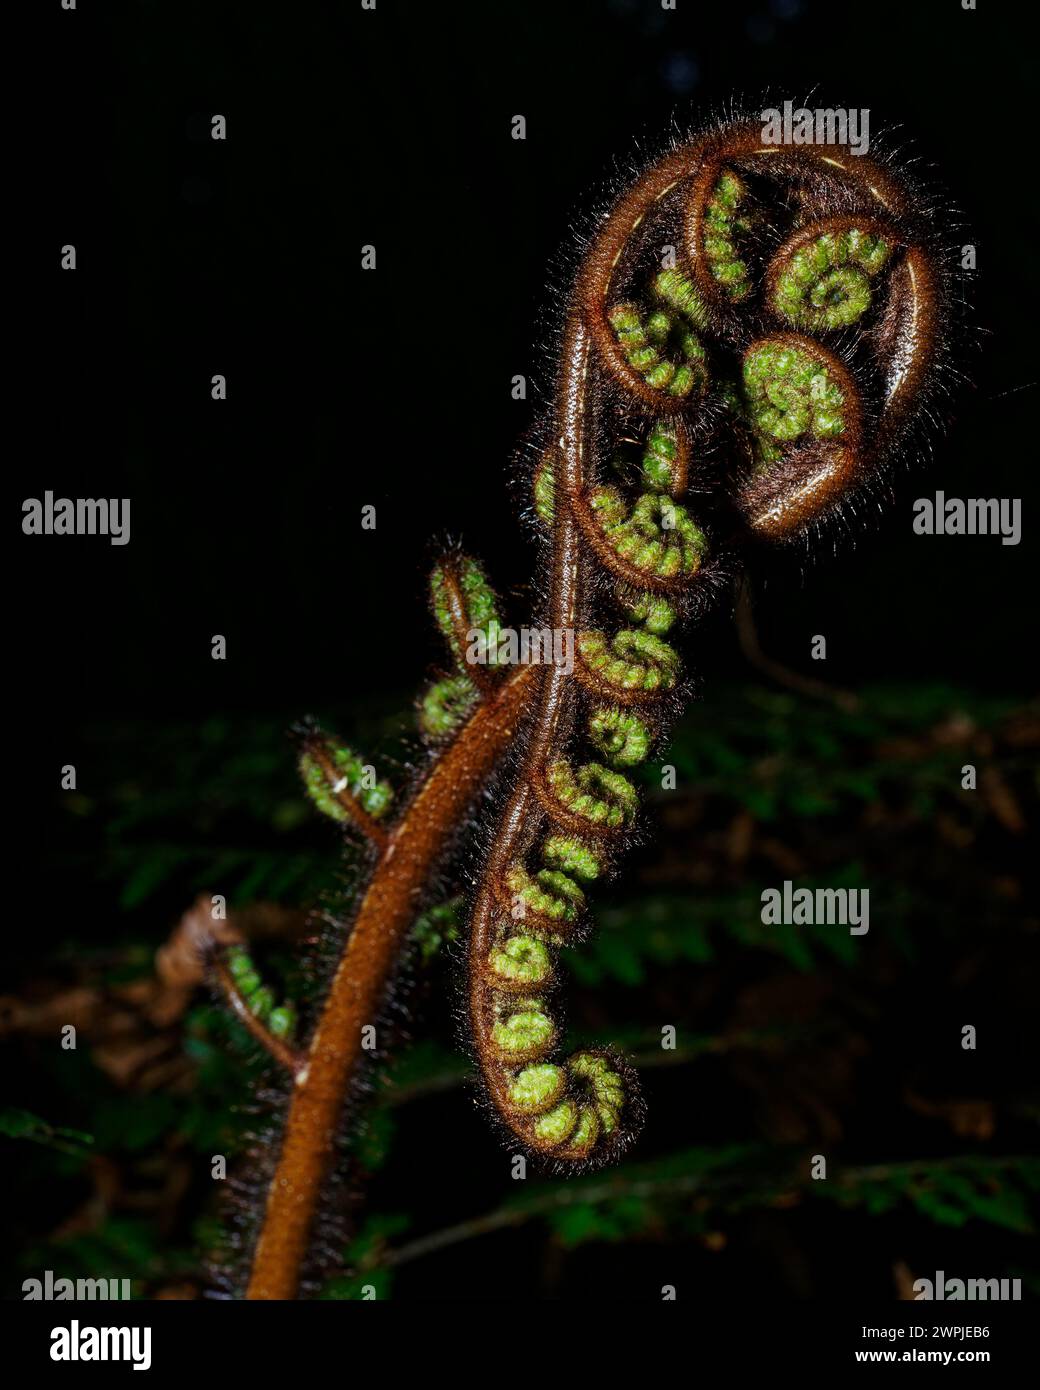 Silhouette of a new fern frond called a koru just starting to unfurl into a new leaf, Aotearoa / New Zealand. Stock Photo